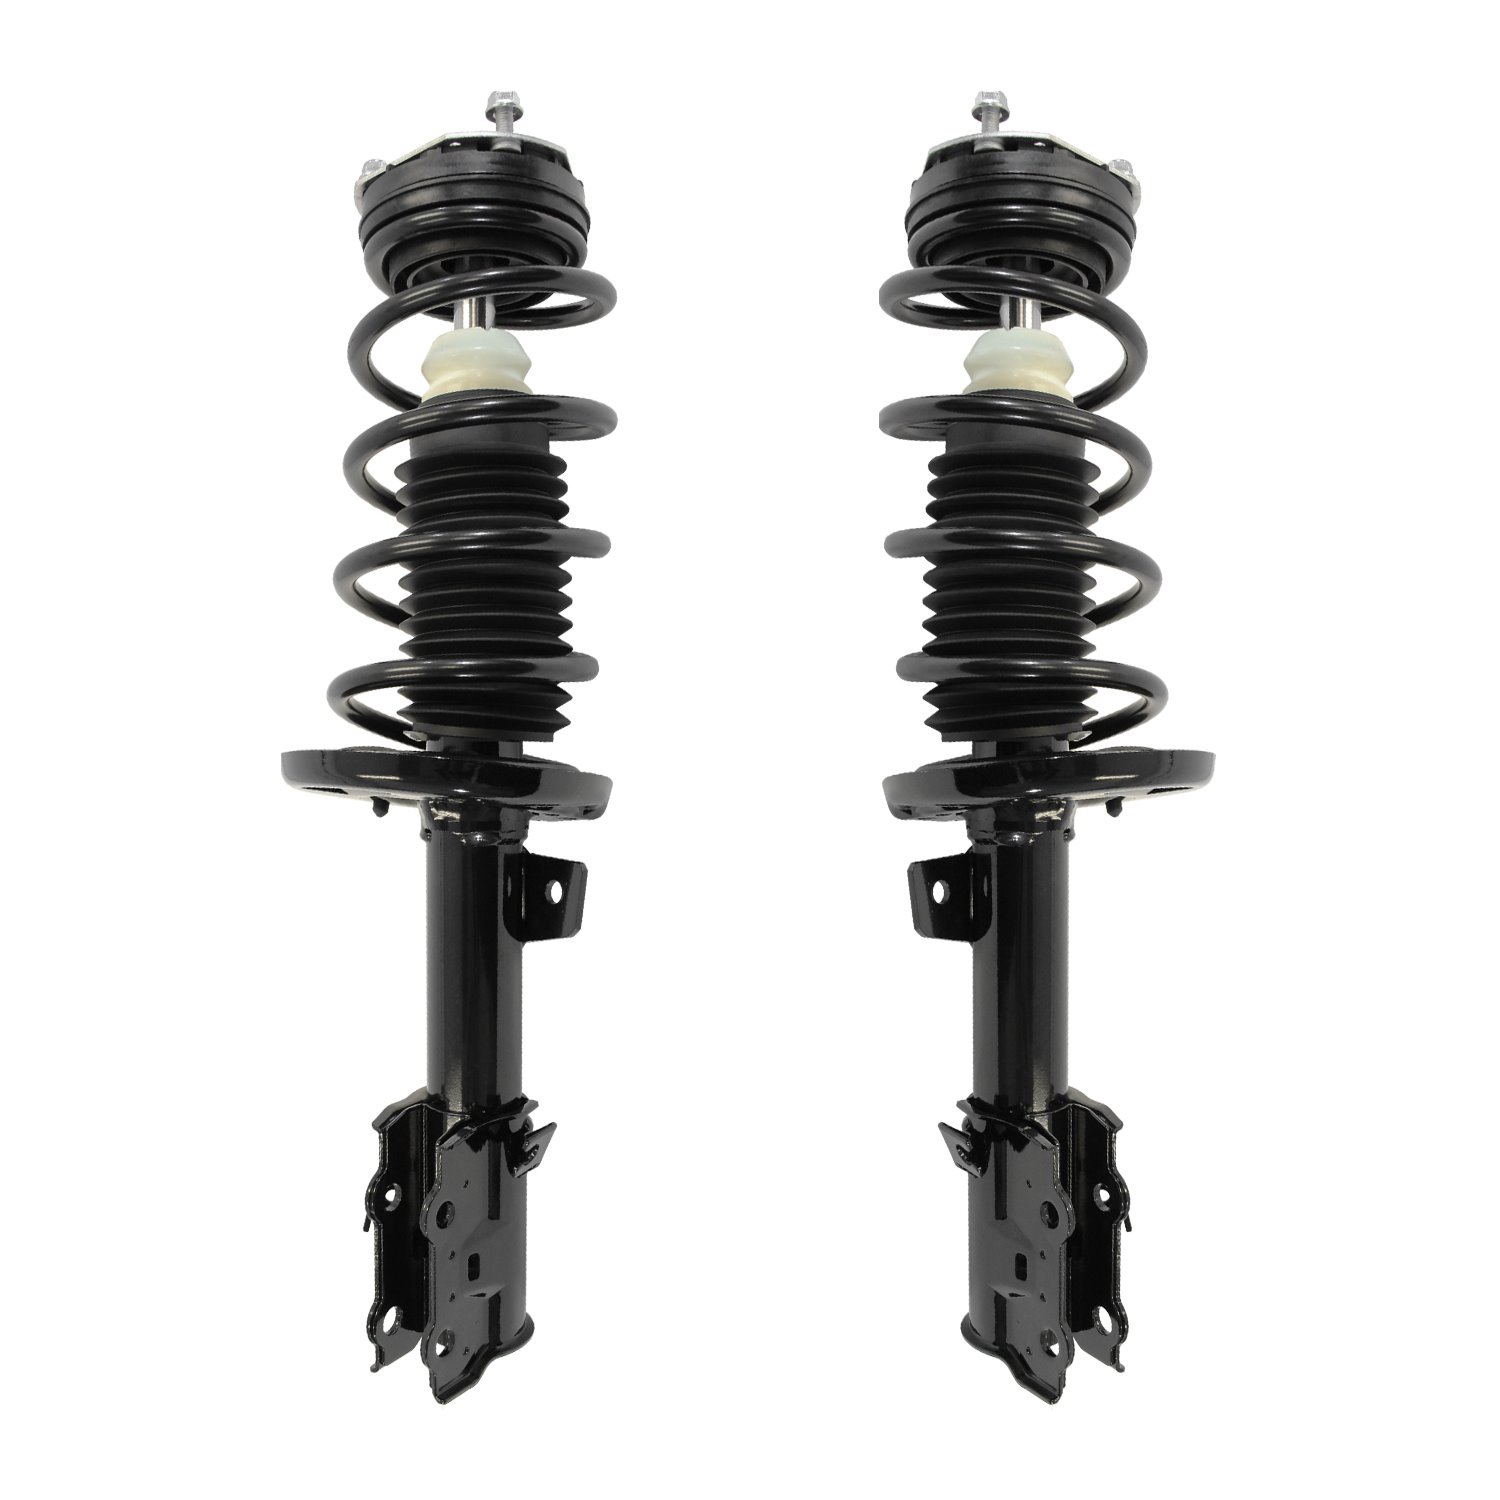 2-11947-11948-001 Suspension Strut & Coil Spring Assembly Set Fits Select Ford Fiesta